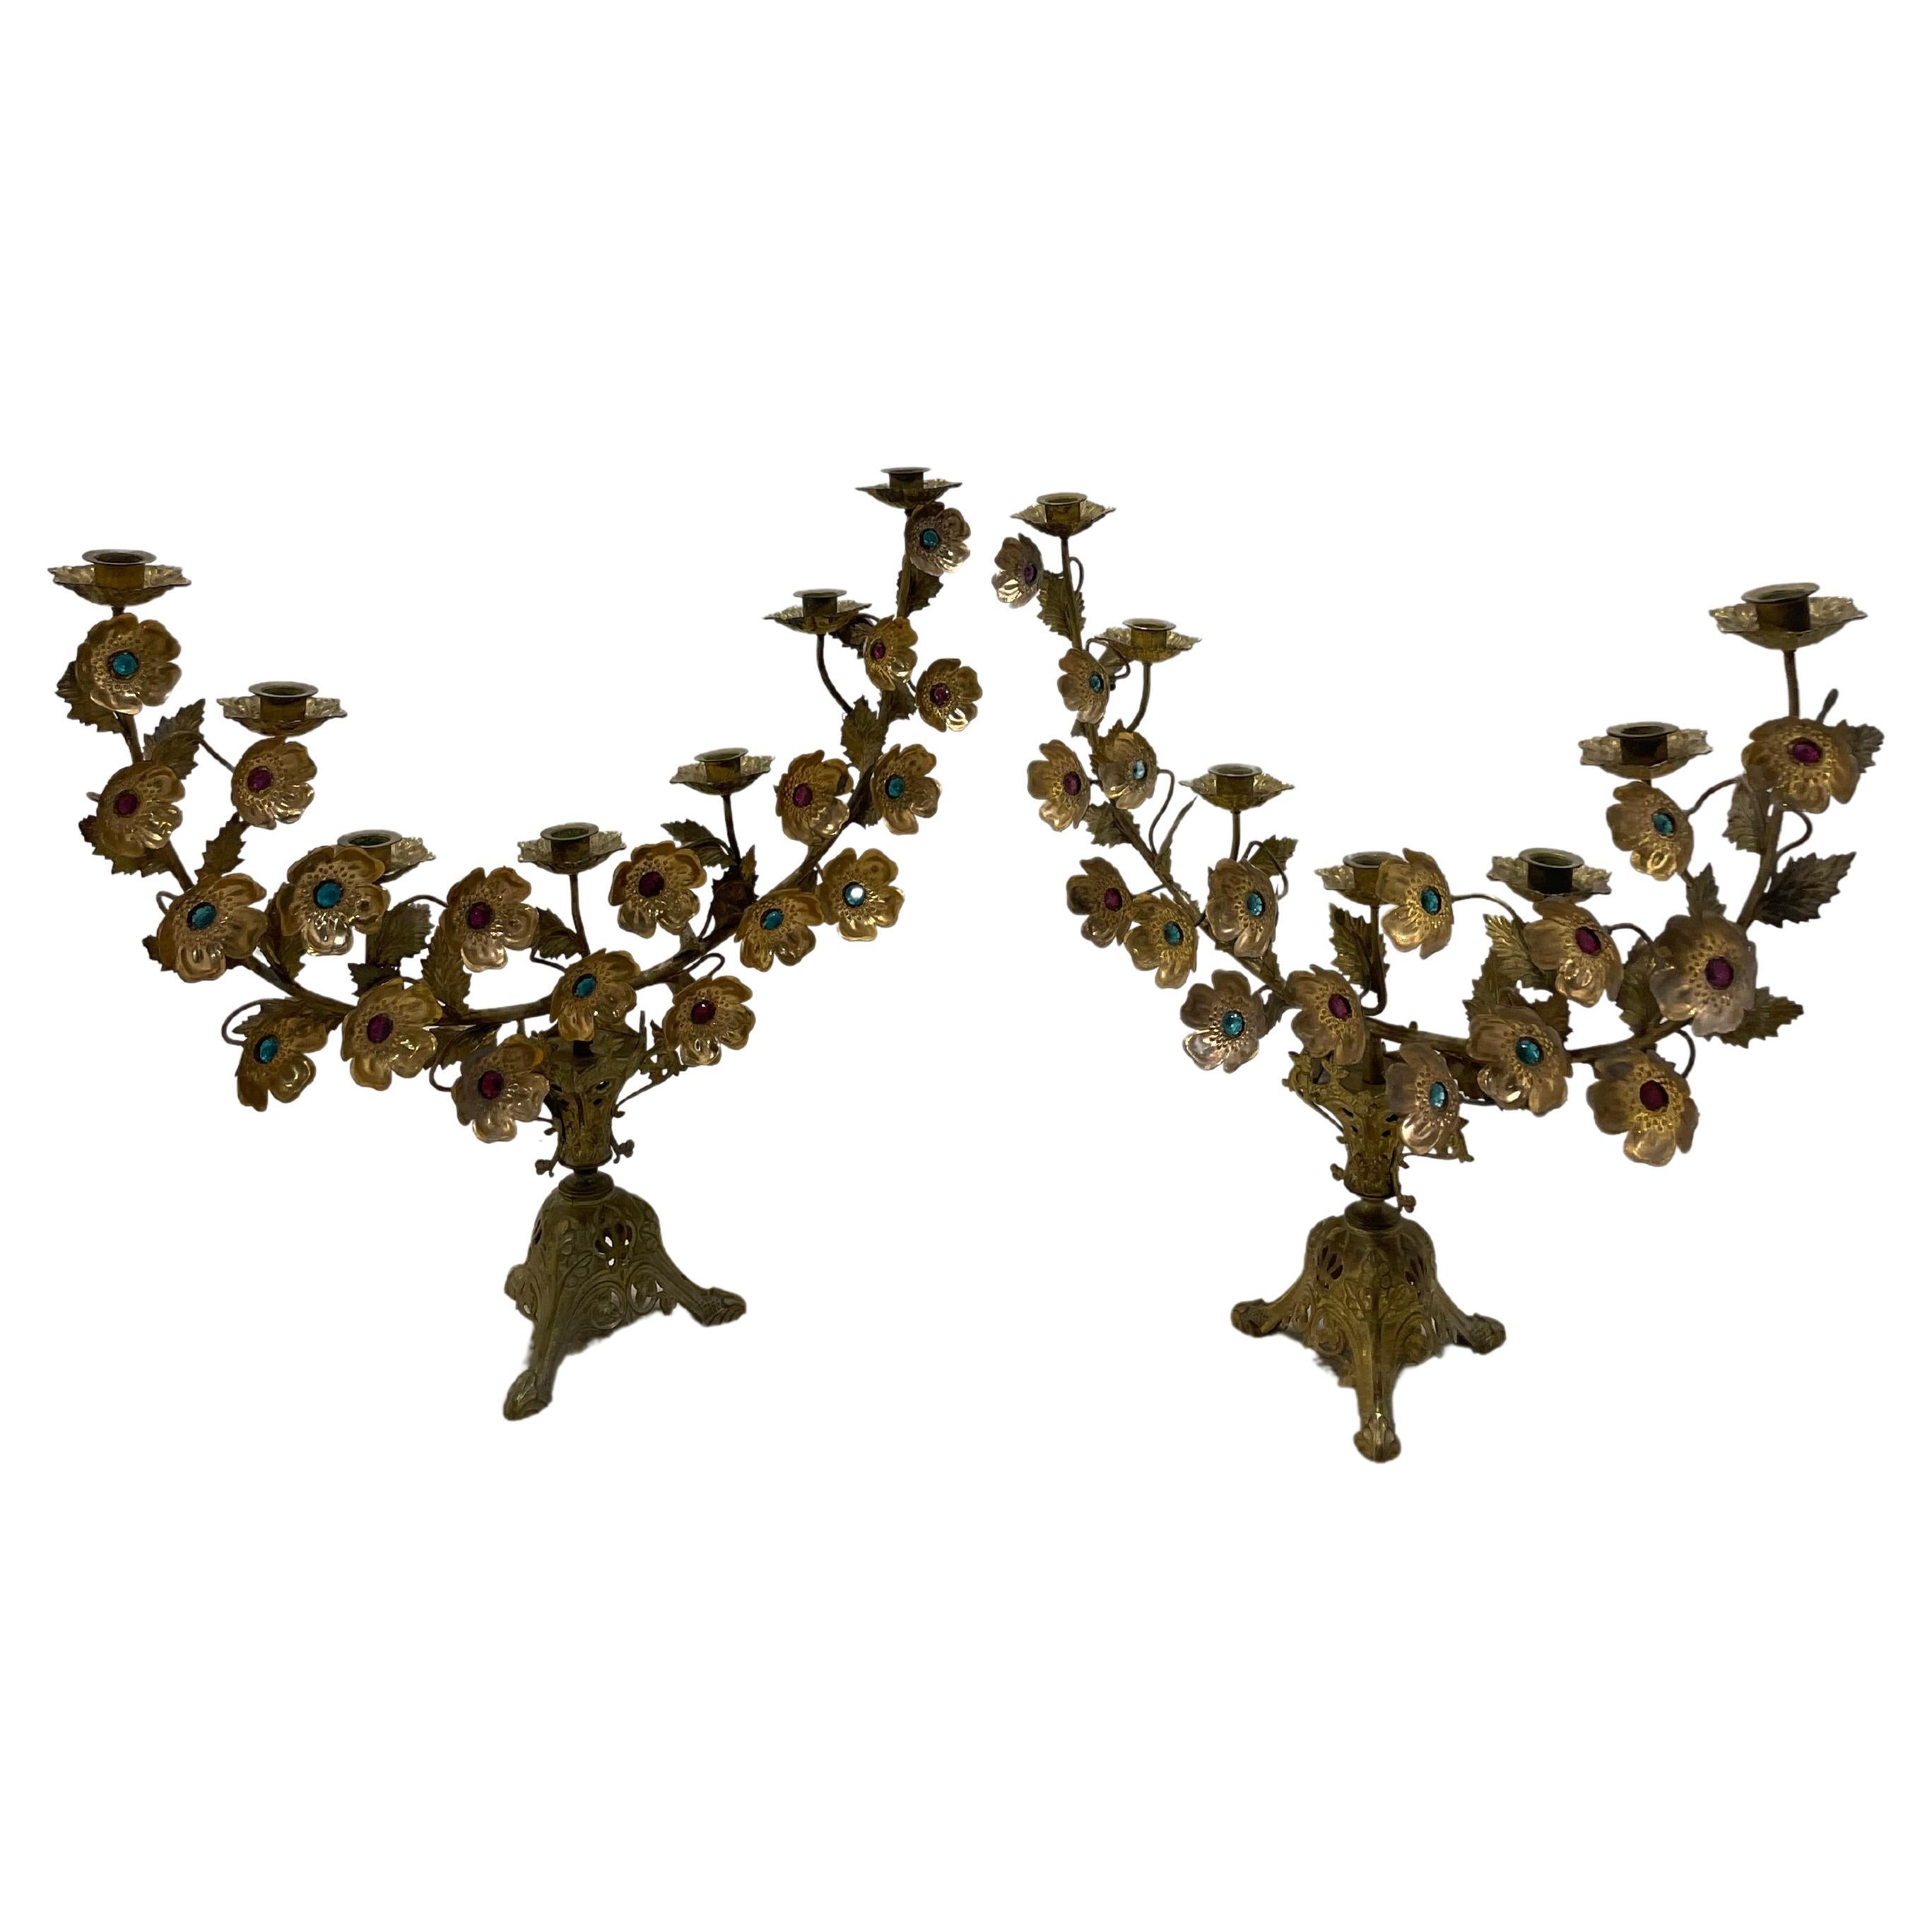 Spectacular pair of gilded bronze candelabre. Seven candles can go on each candelabra, the decorations delicat of flowers with stones of colors in glass, gives all the charms of the Italian baroque.